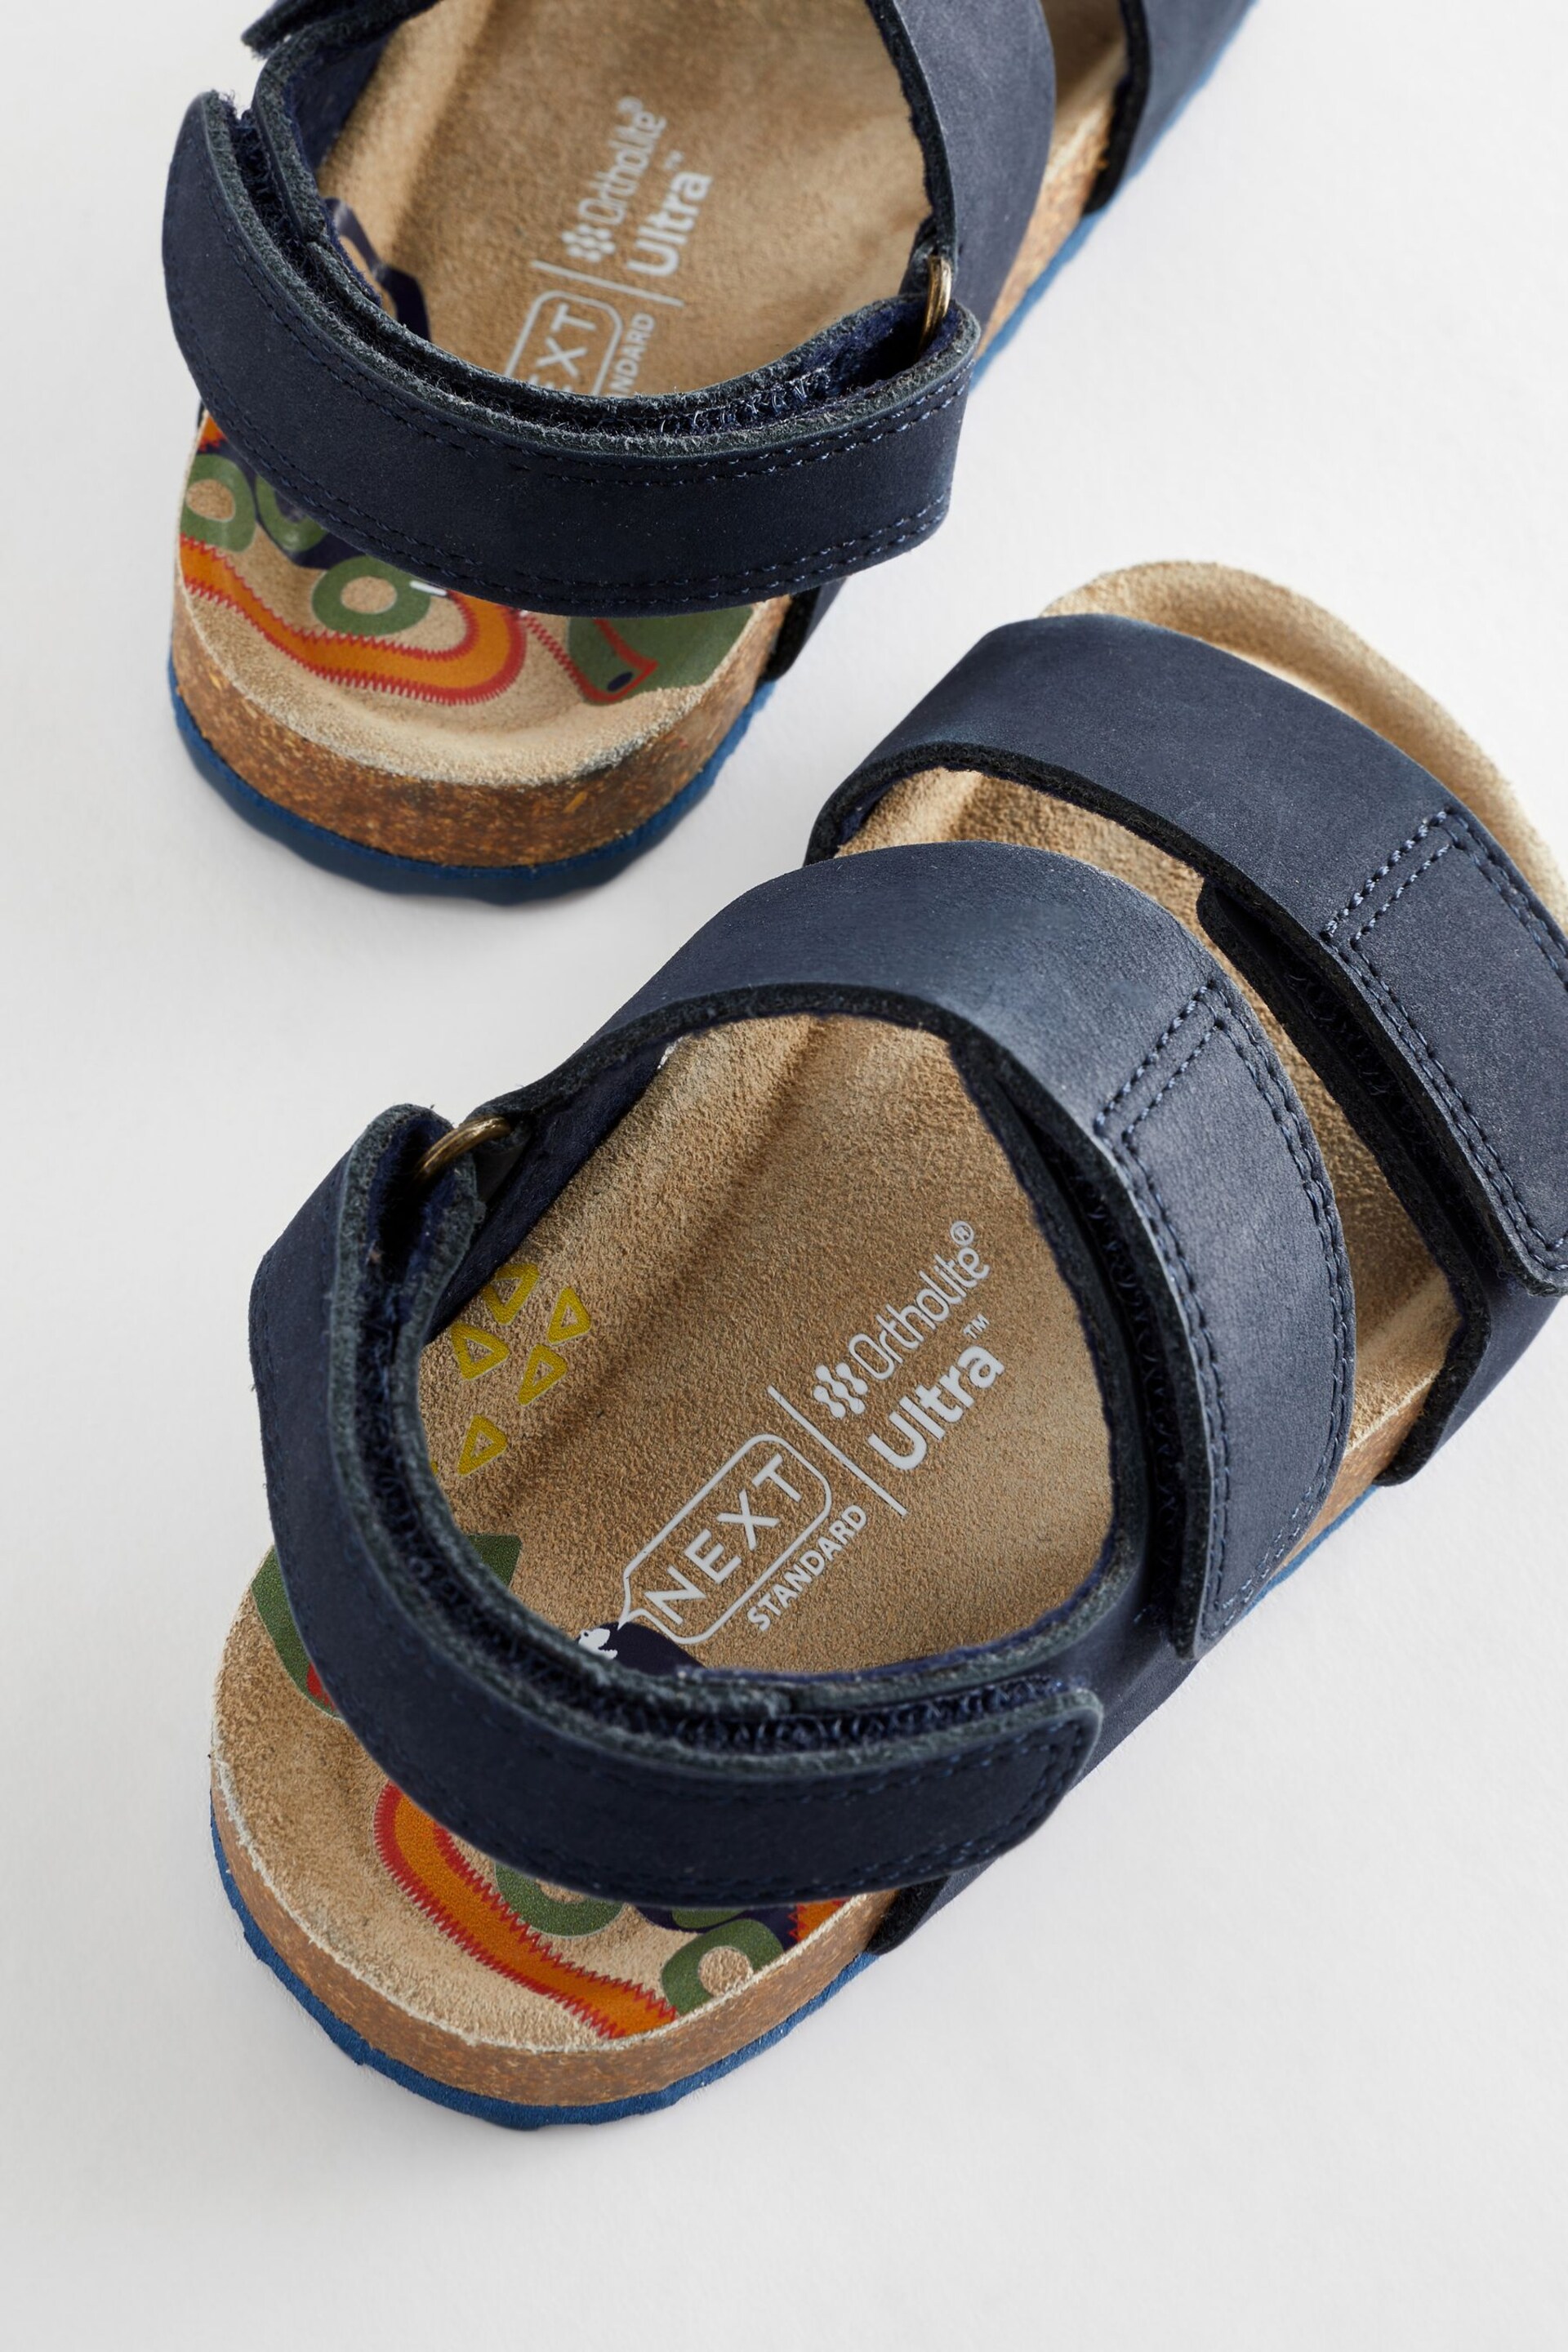 Navy Wide Fit (G) Leather Touch Fastening Corkbed Sandals - Image 6 of 6